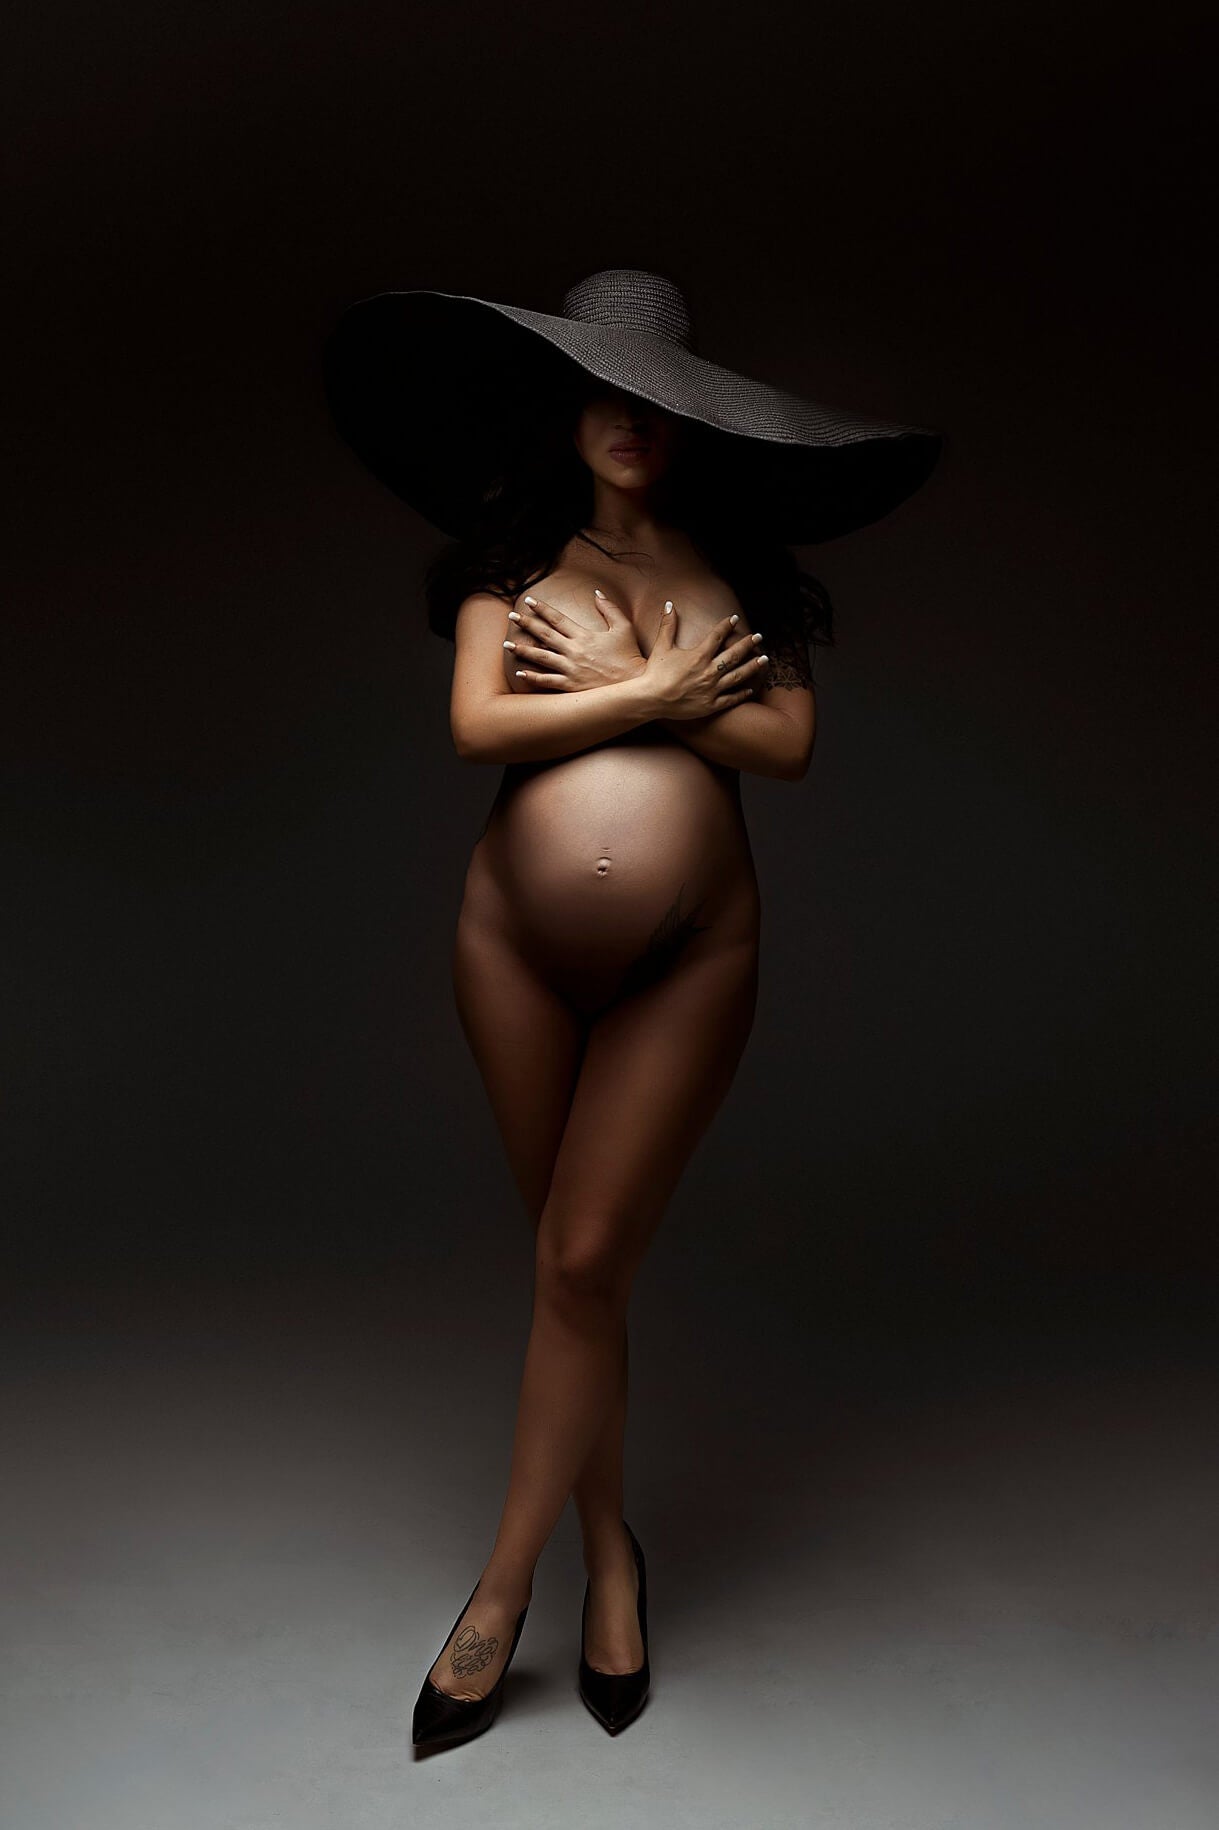 The woman is standing inside a studio. The product in the photo is a big black hat. She is wearing it on her head. The hat is covering up a part of her face. She is standing with her legs crossed and wearing high black heels. 